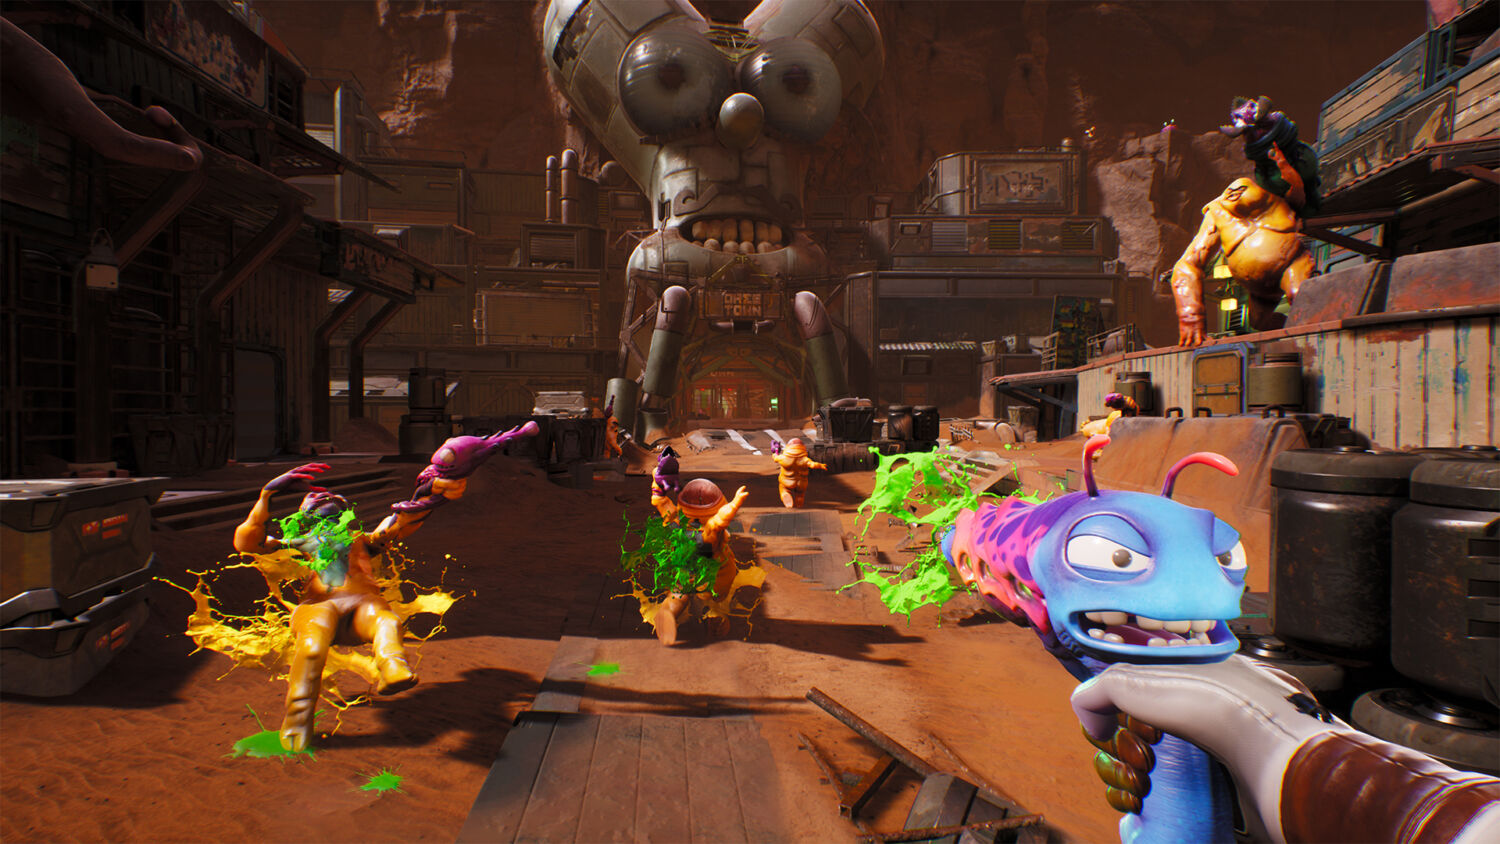 High on Life pushes the frontiers of comedy in video games - Unreal Engine